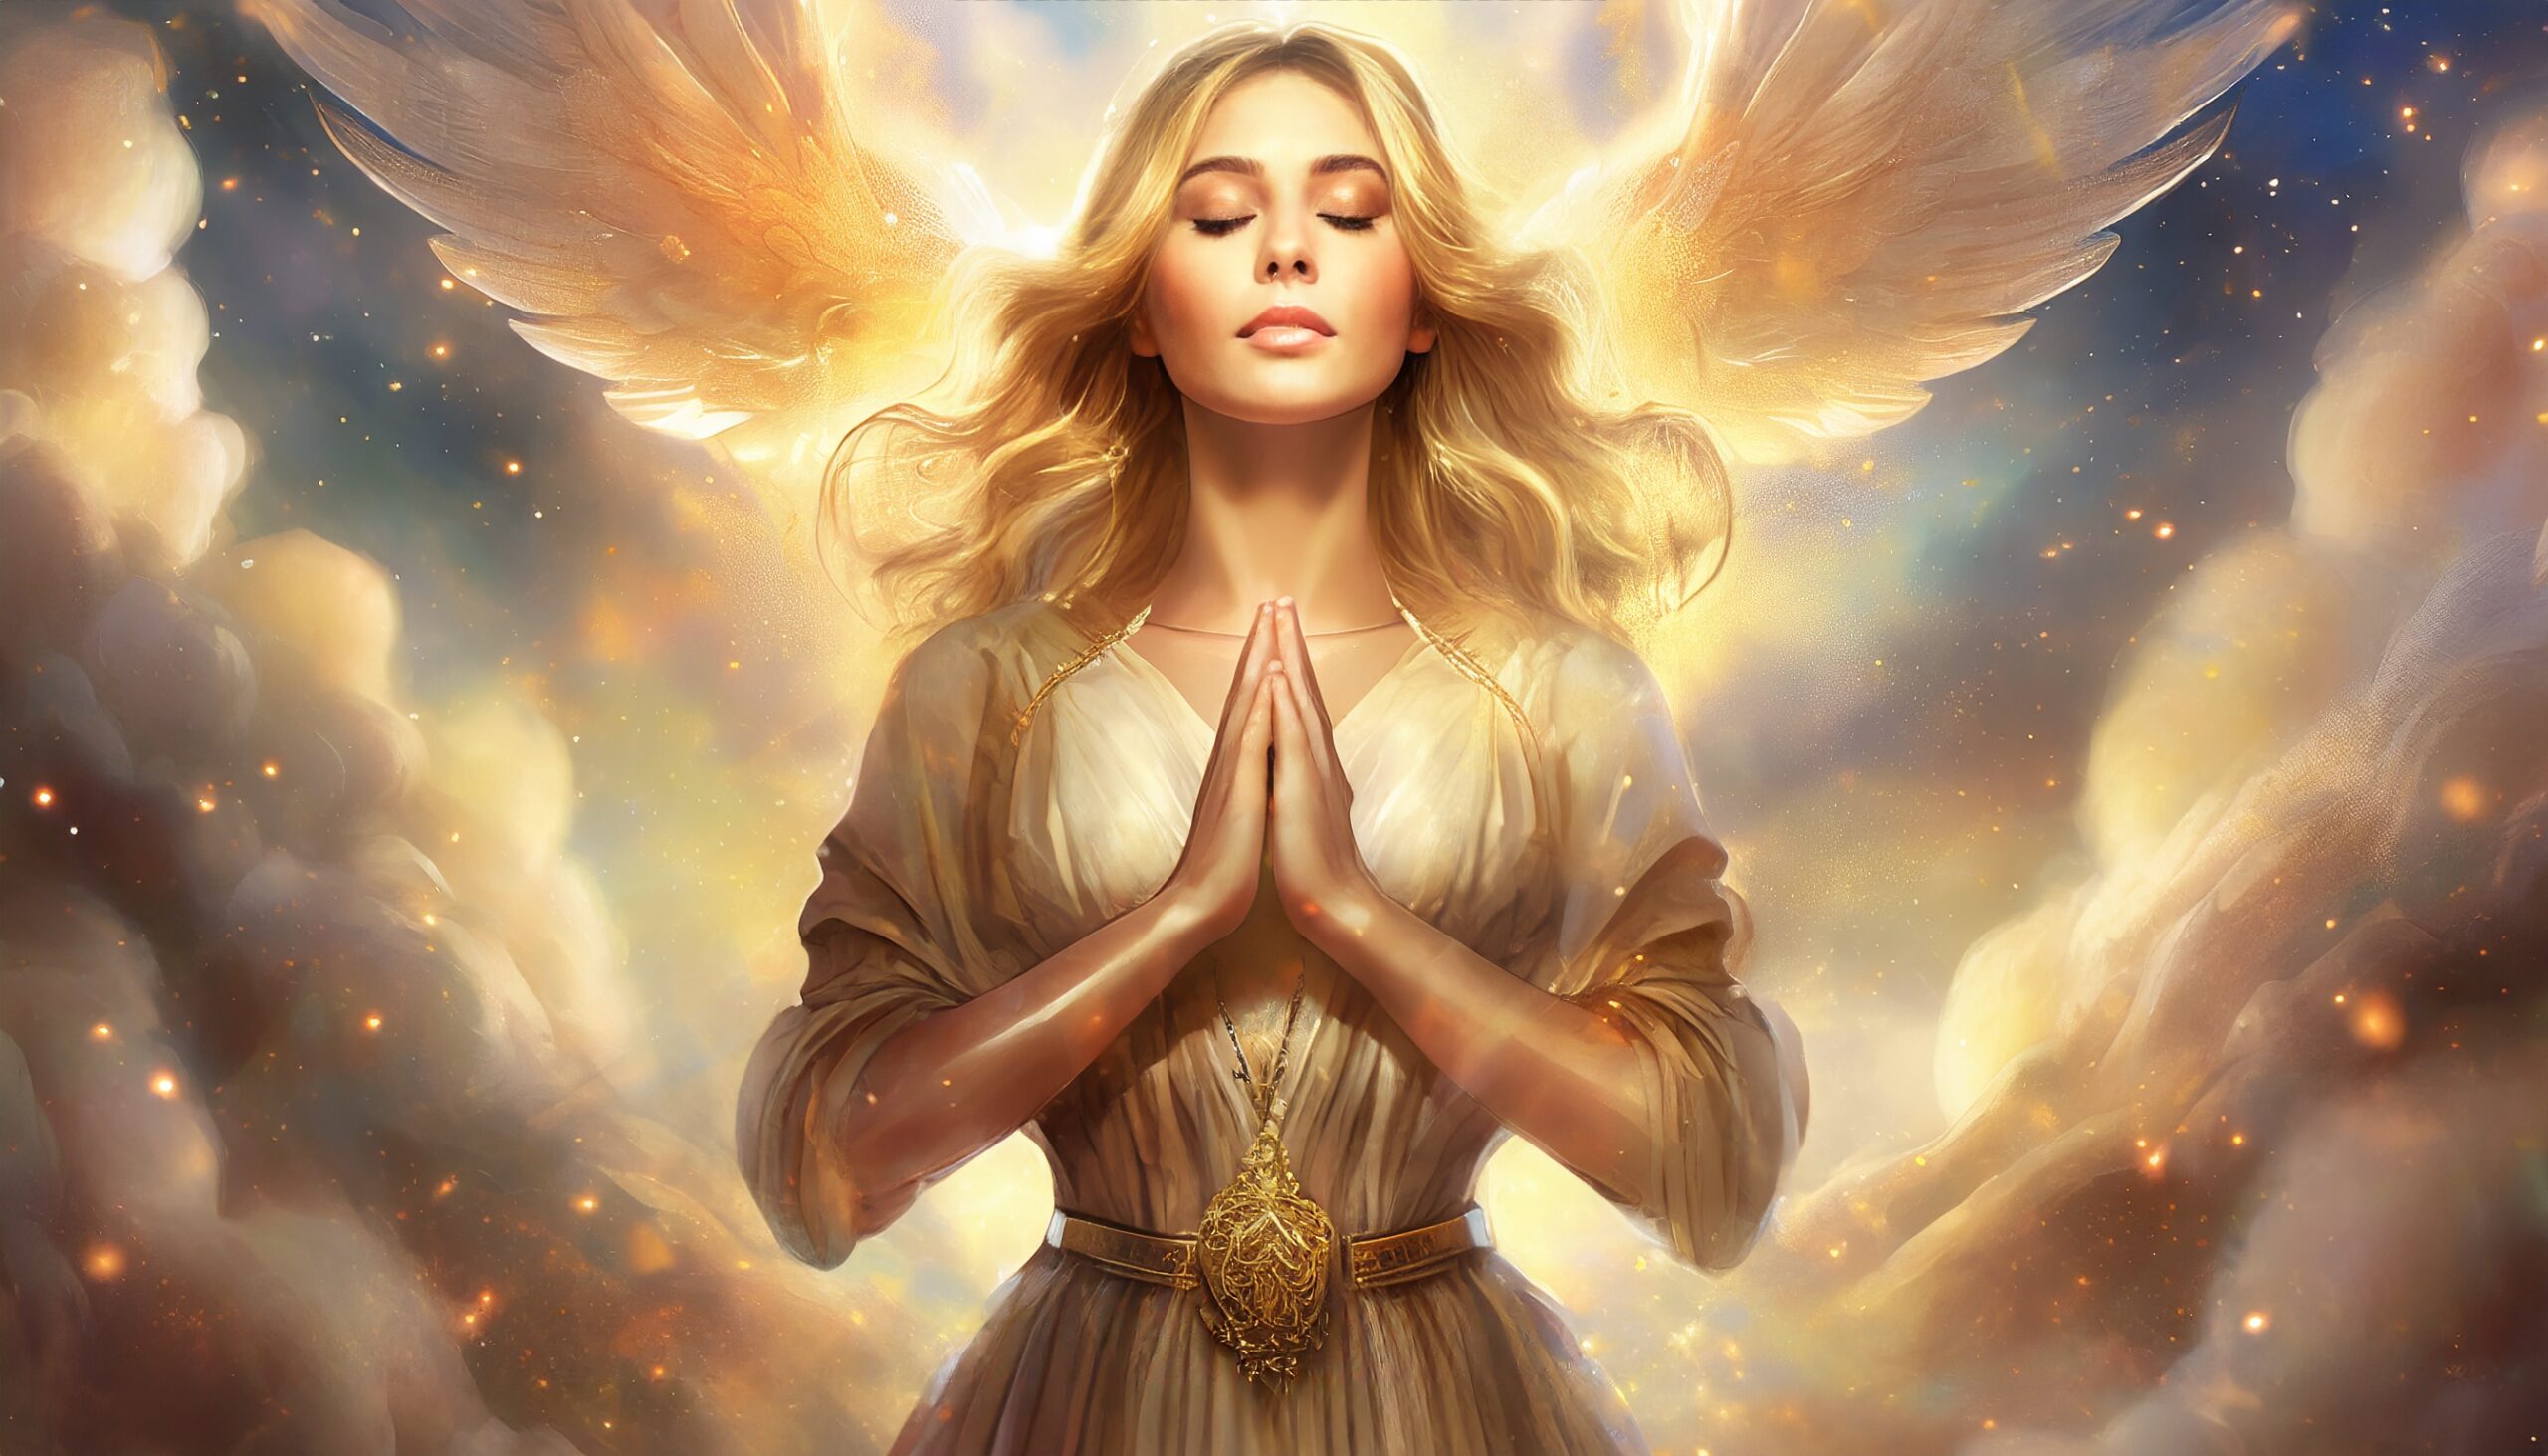 Firefly A blonde goddess of love with her head bowed and holding her hands to her heart in prayer po